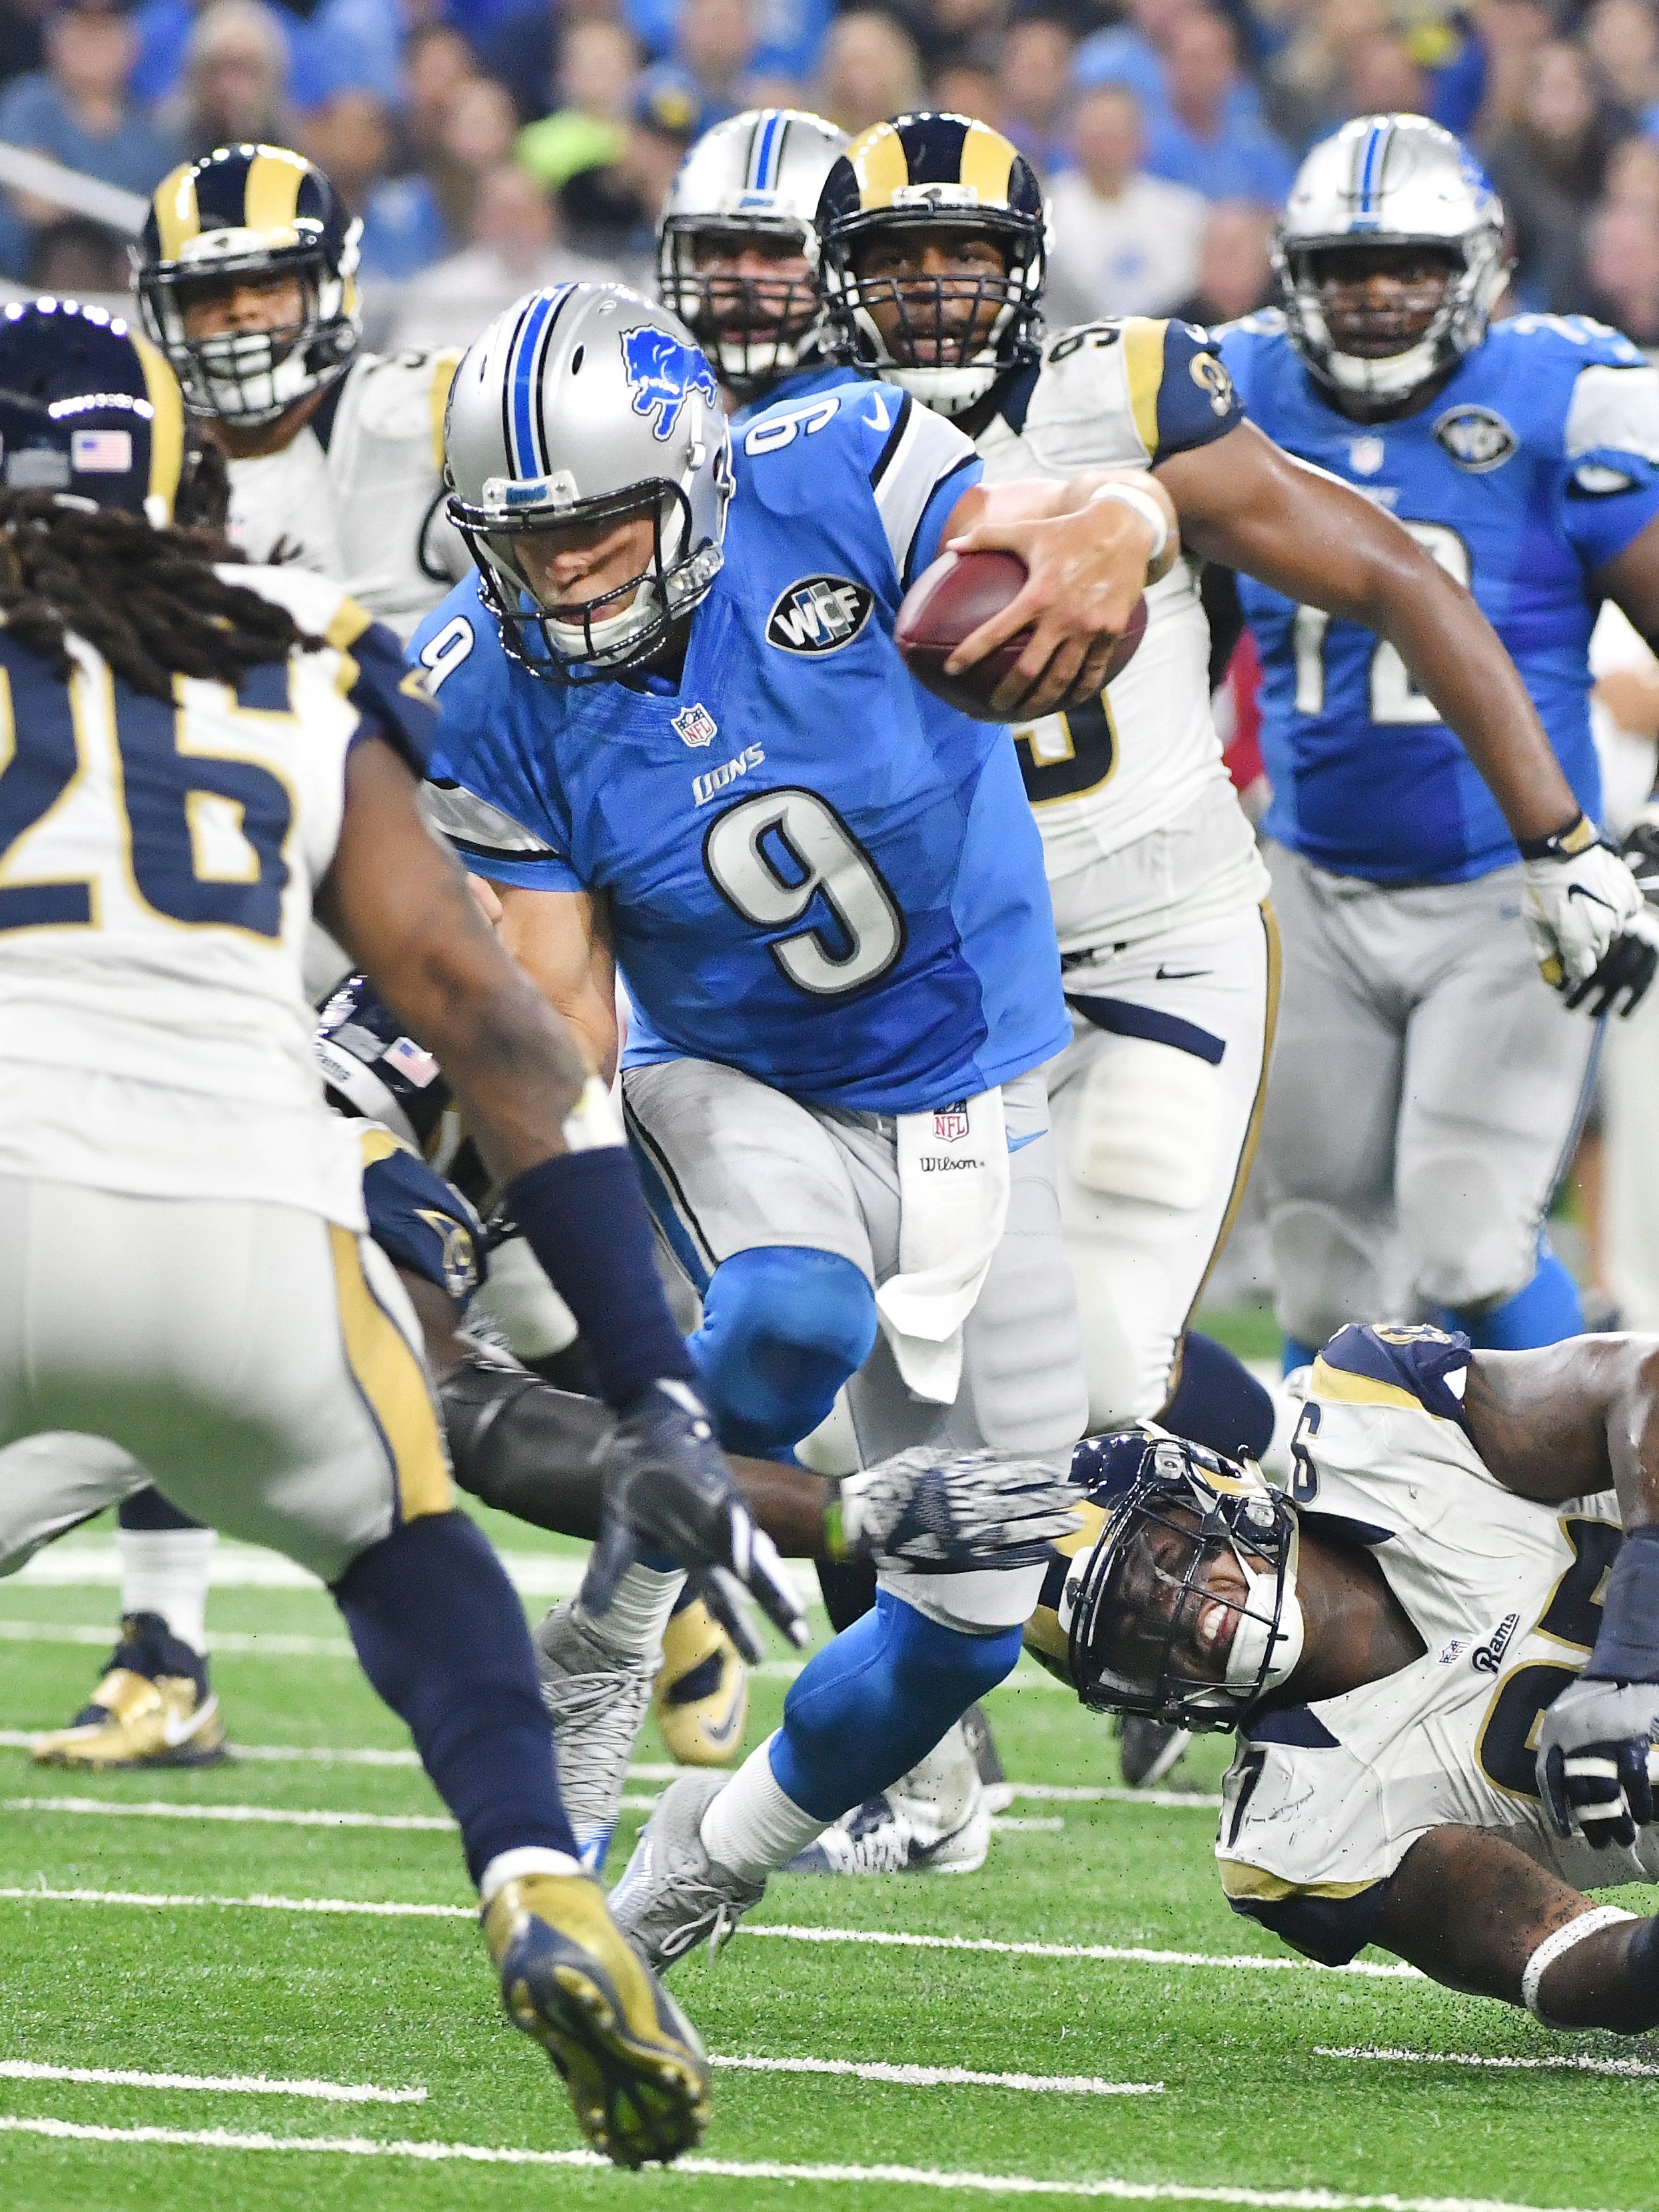 Lions quarterback Matthew Stafford doesn't slide but scrambles away from the Rams' Eugene Sims for a first down late in the fourth quarter Sunday in the Lions 31-28 win.